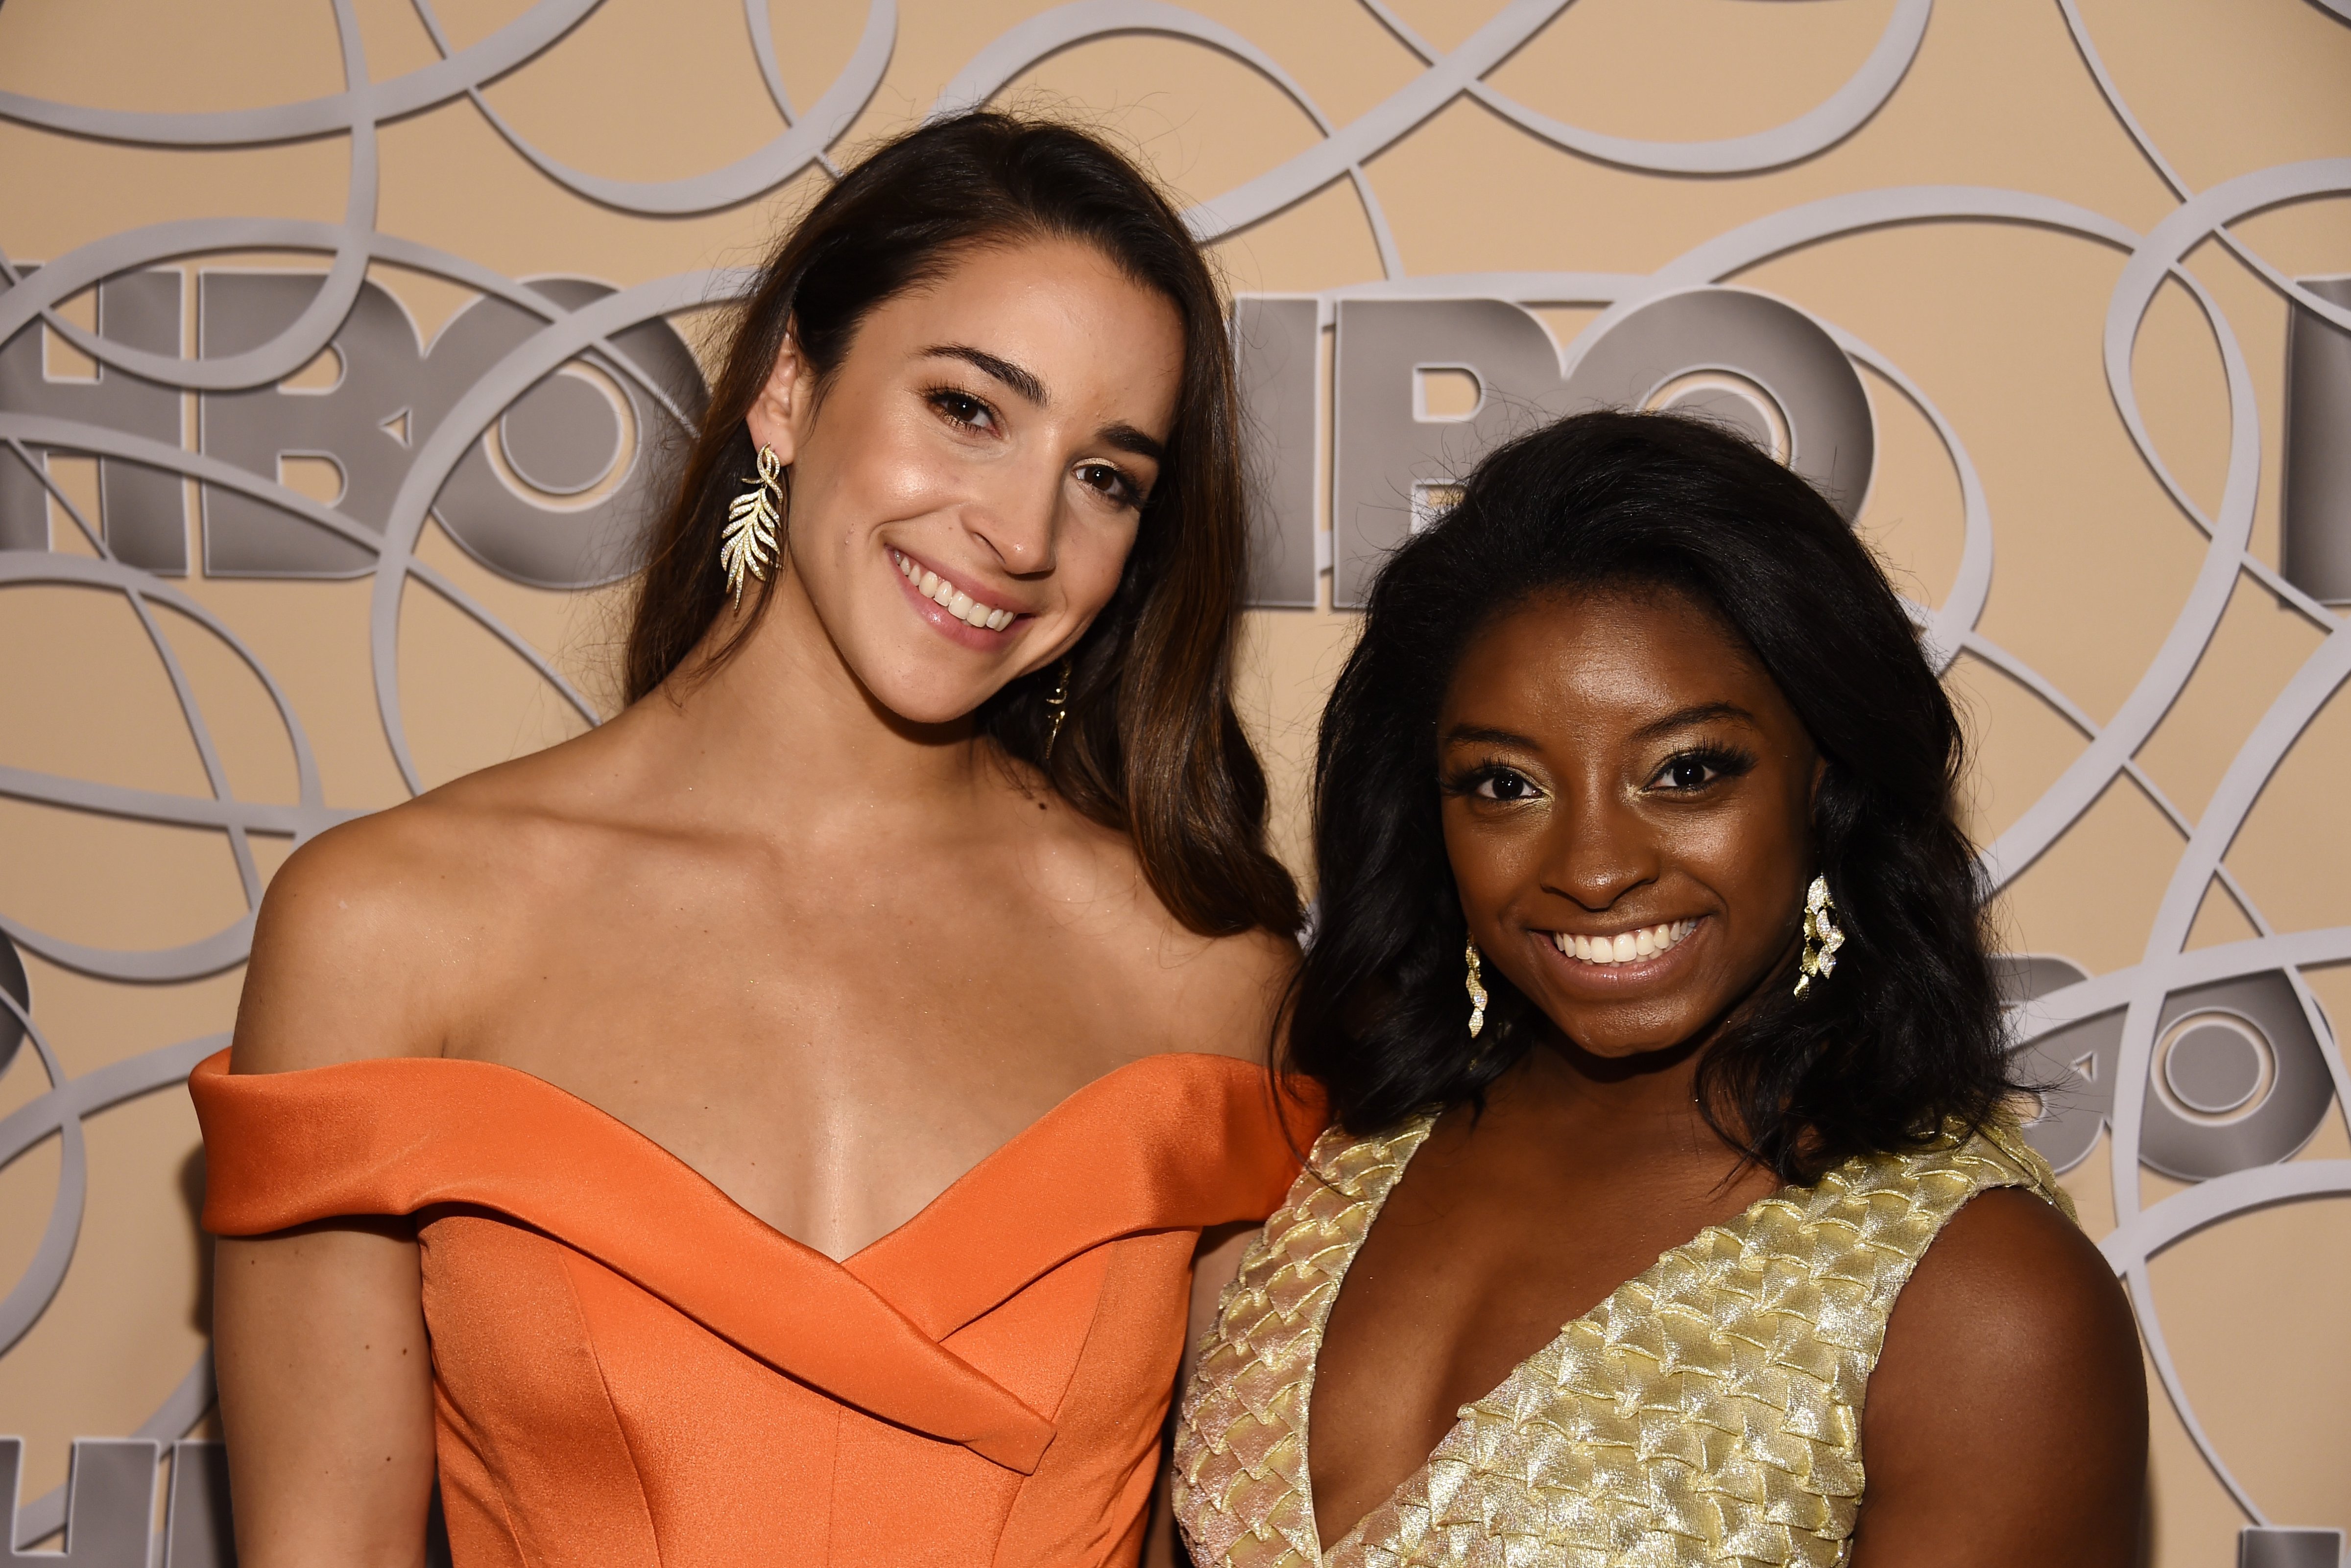 LOS ANGELES, CA - JANUARY 08:  Olympic gymnasts Aly Raisman (L) and Simone Biles arrive at HBO's Official Golden Globe Awards After Party at Circa 55 Restaurant on January 8, 2017 in Los Angeles, California.  (Photo by Amanda Edwards/WireImage) (Amanda Edwards&mdash;WireImage/Getty Images)